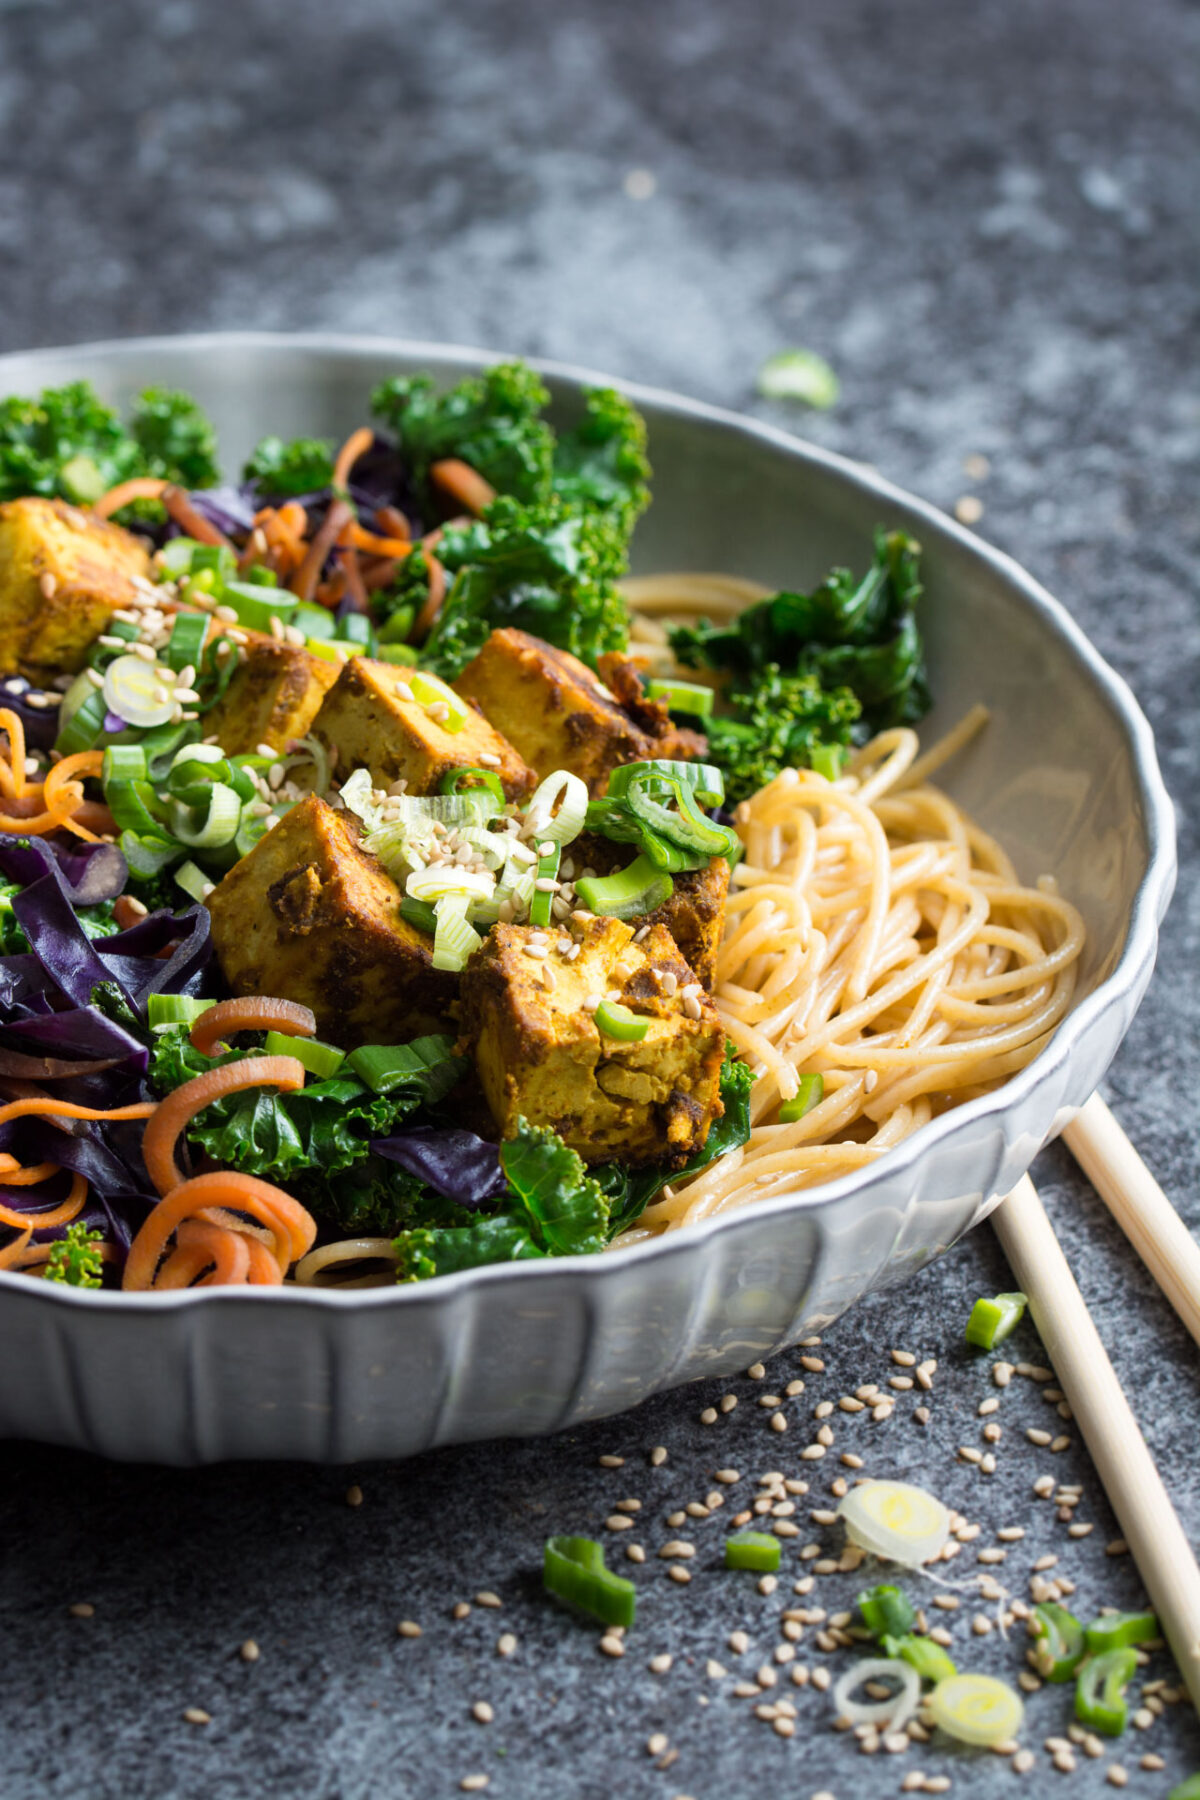 A bowl is filled with a nutritious kale stir fry with crispy curried tofu with chopsticks laying on the side.